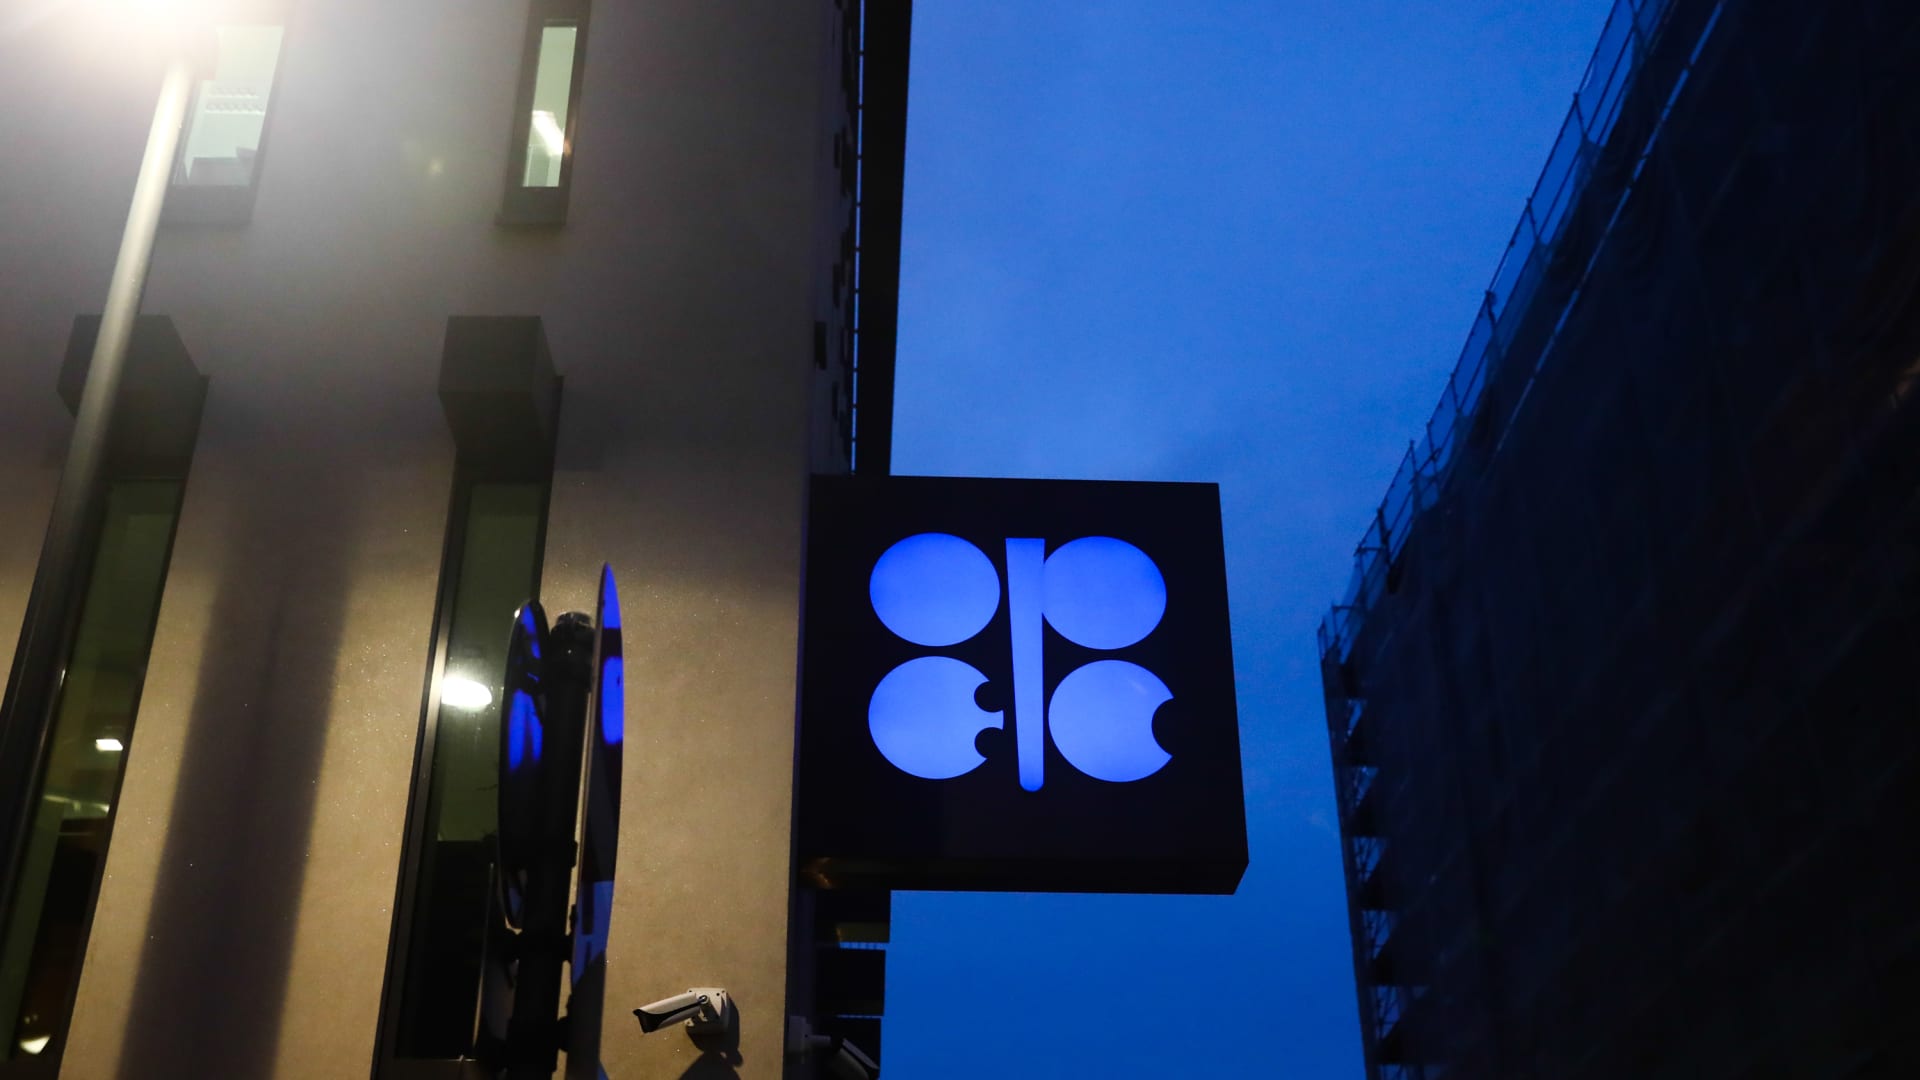 OPEC + has limited spare capacity, Russia is less relevant